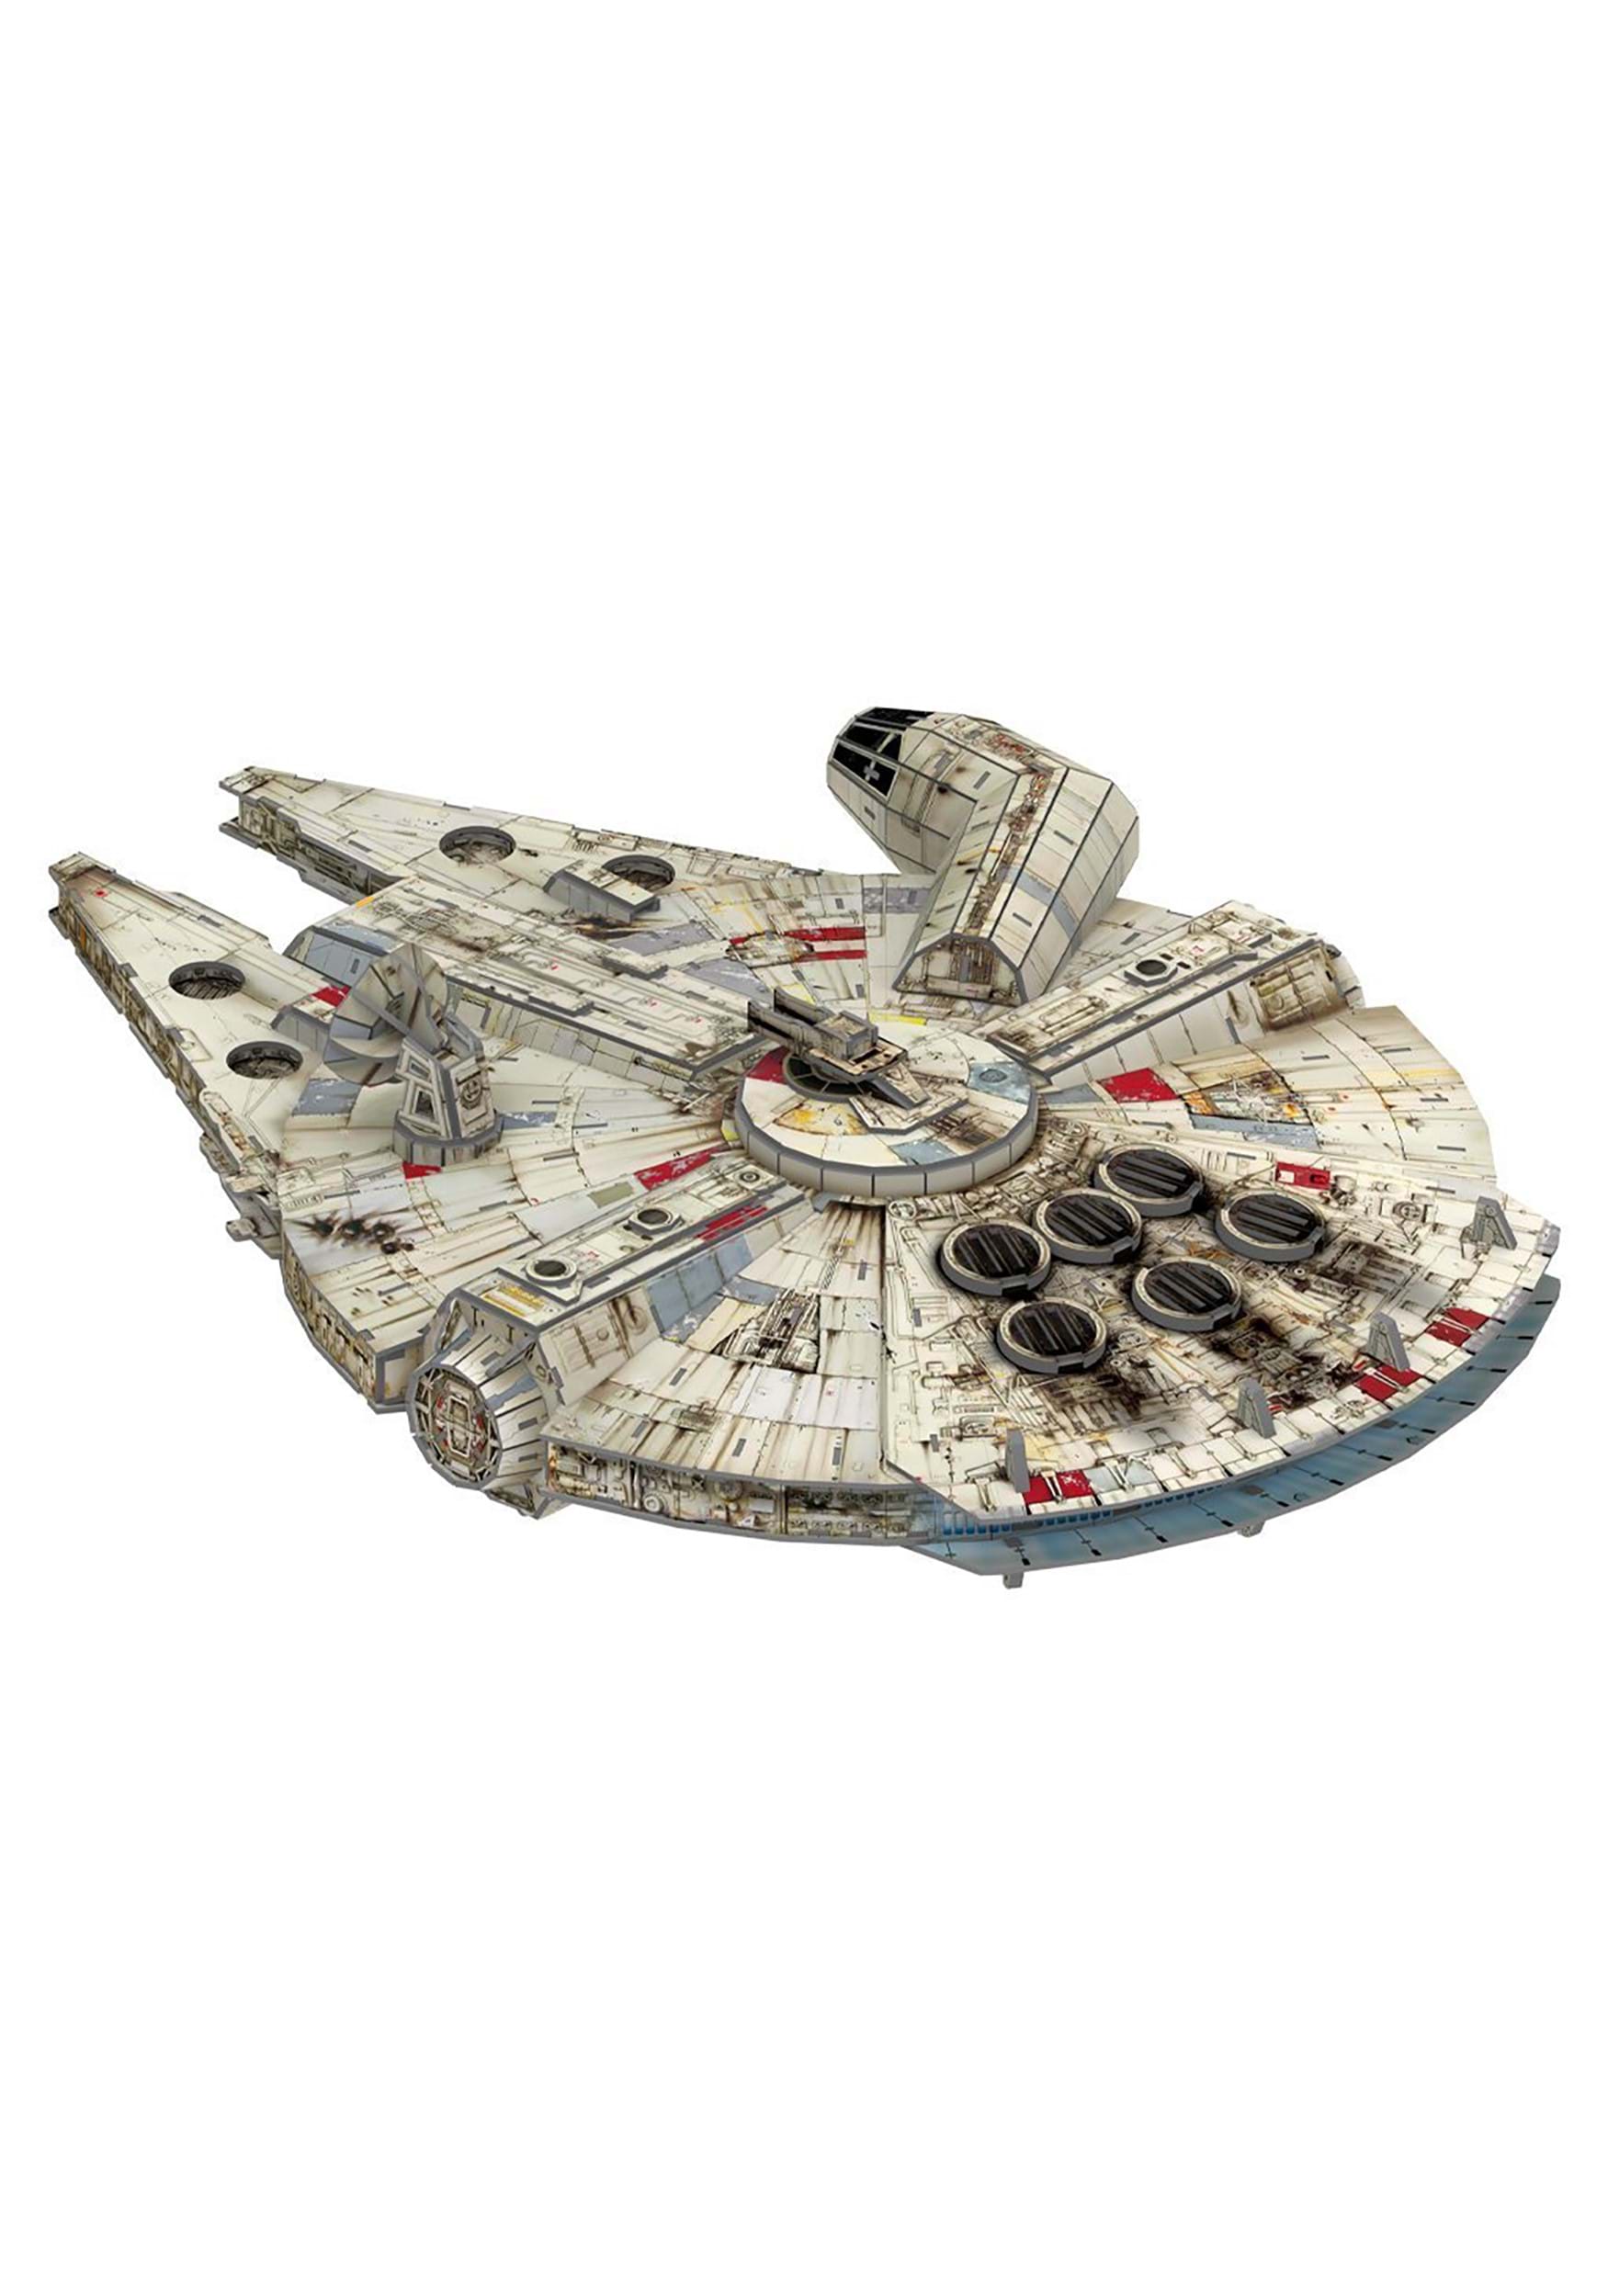 Star Wars 3D Puzzle Twin Pack - Star Wars Millennium Falcon and